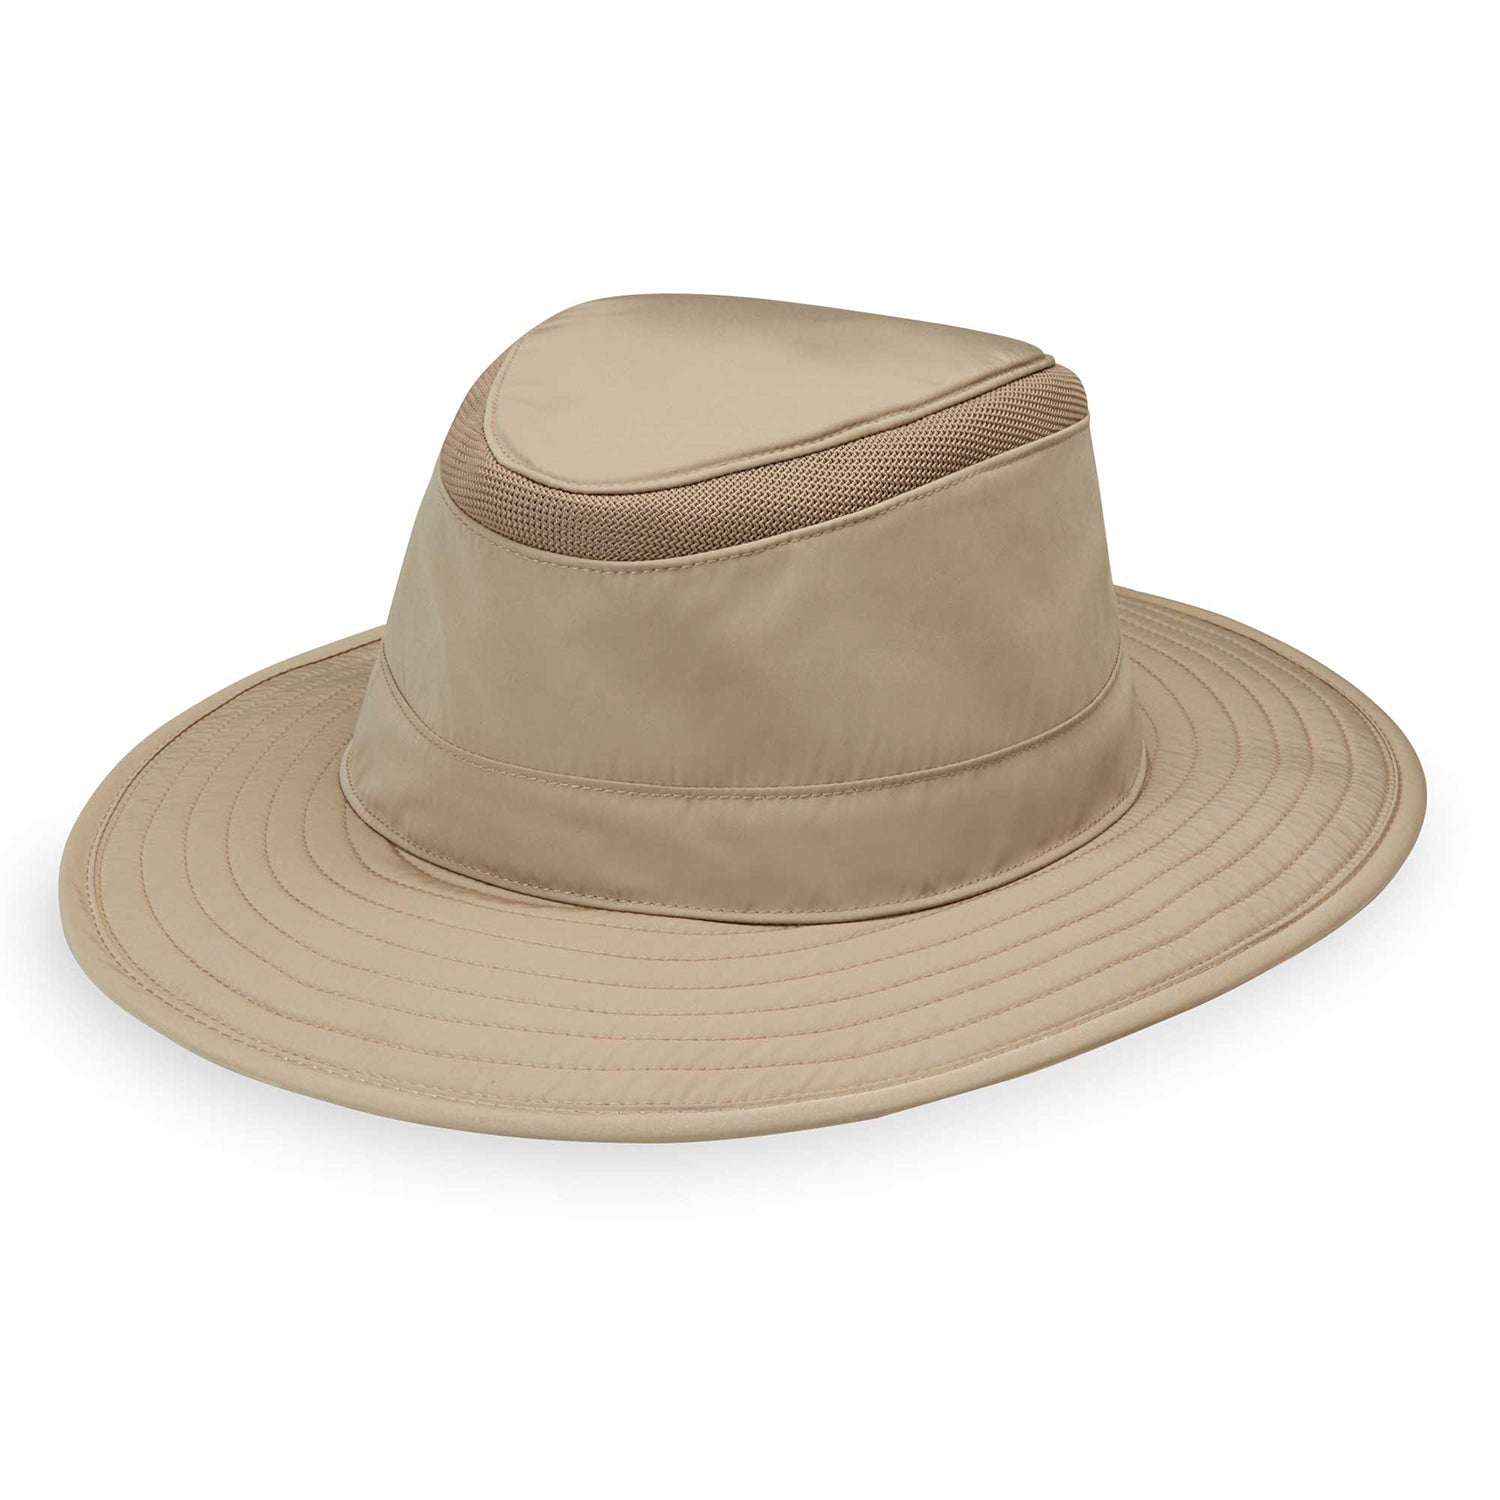 Featuring Summit Waterproof sun hat by Wallaroo, with UPF 50+ rating and packable material for travel